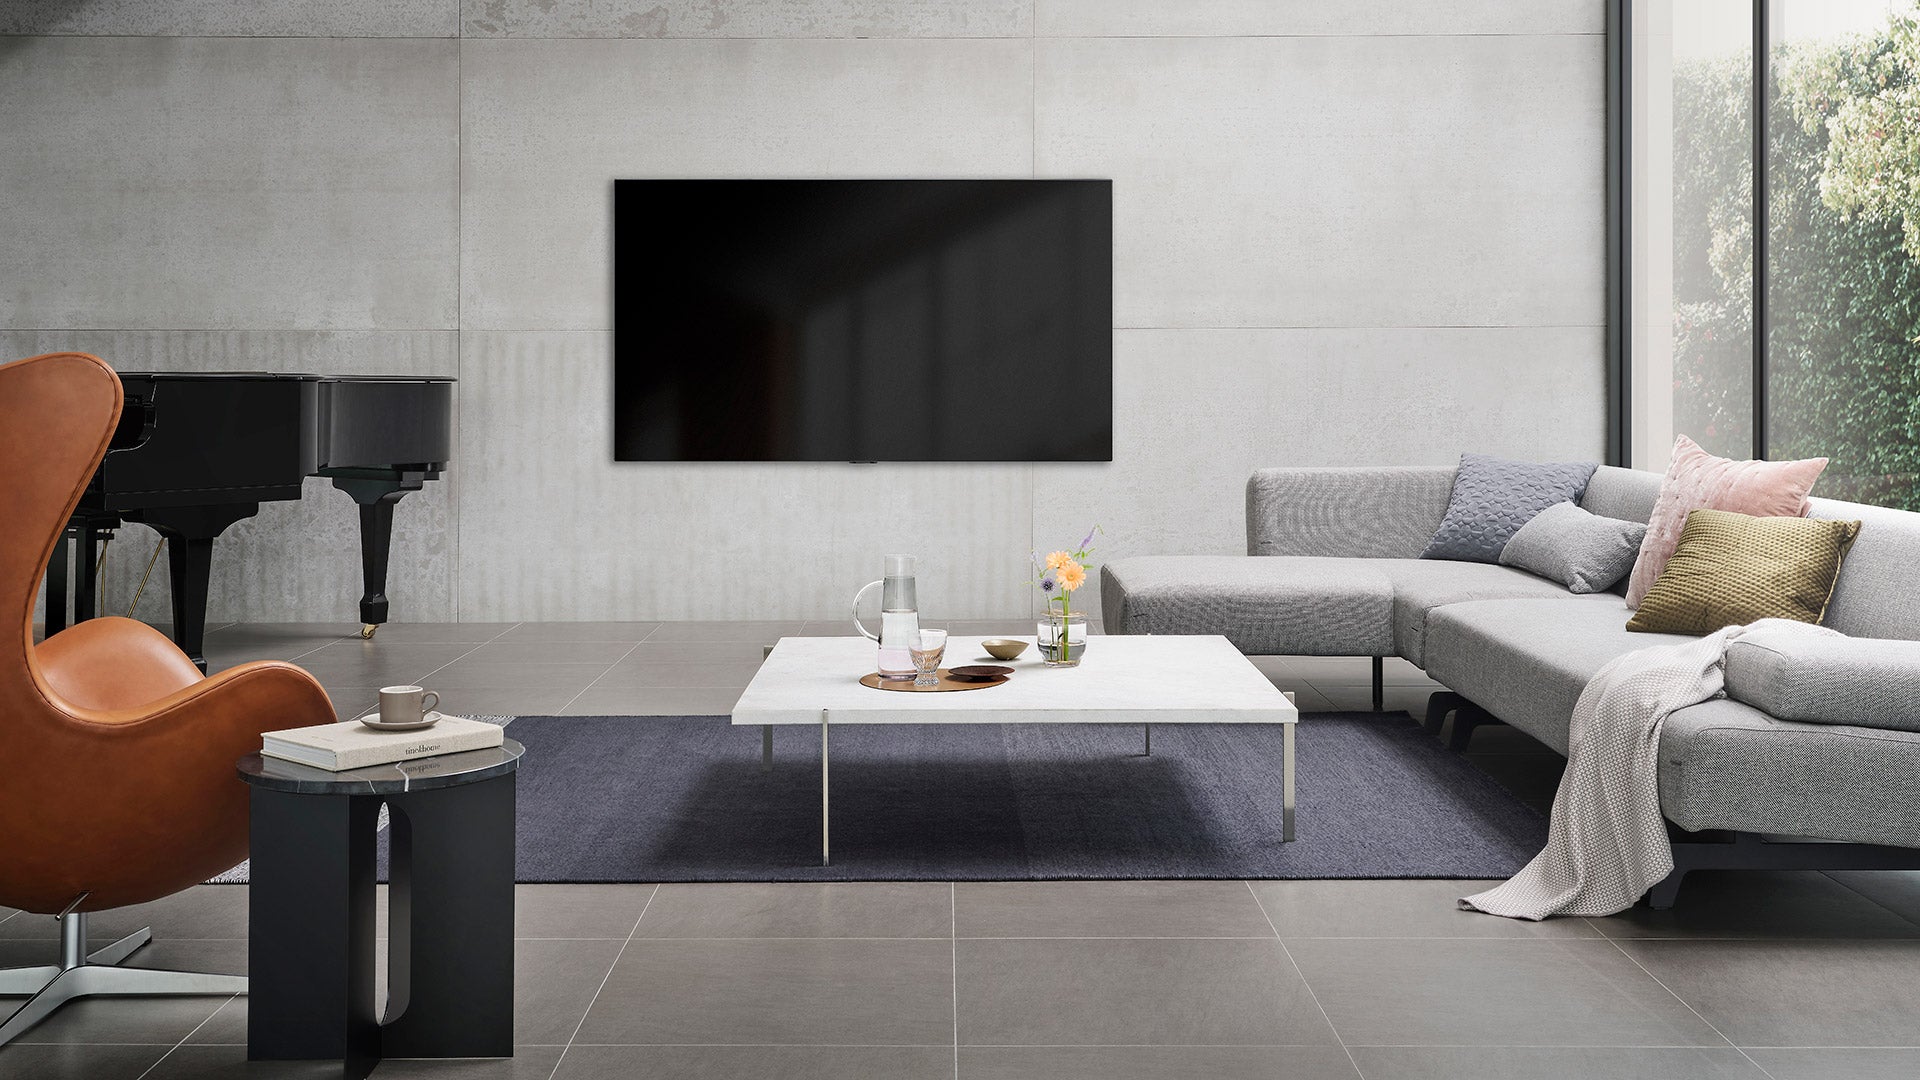 Gentec International to Distribute LG Home Entertainment Products in Canada